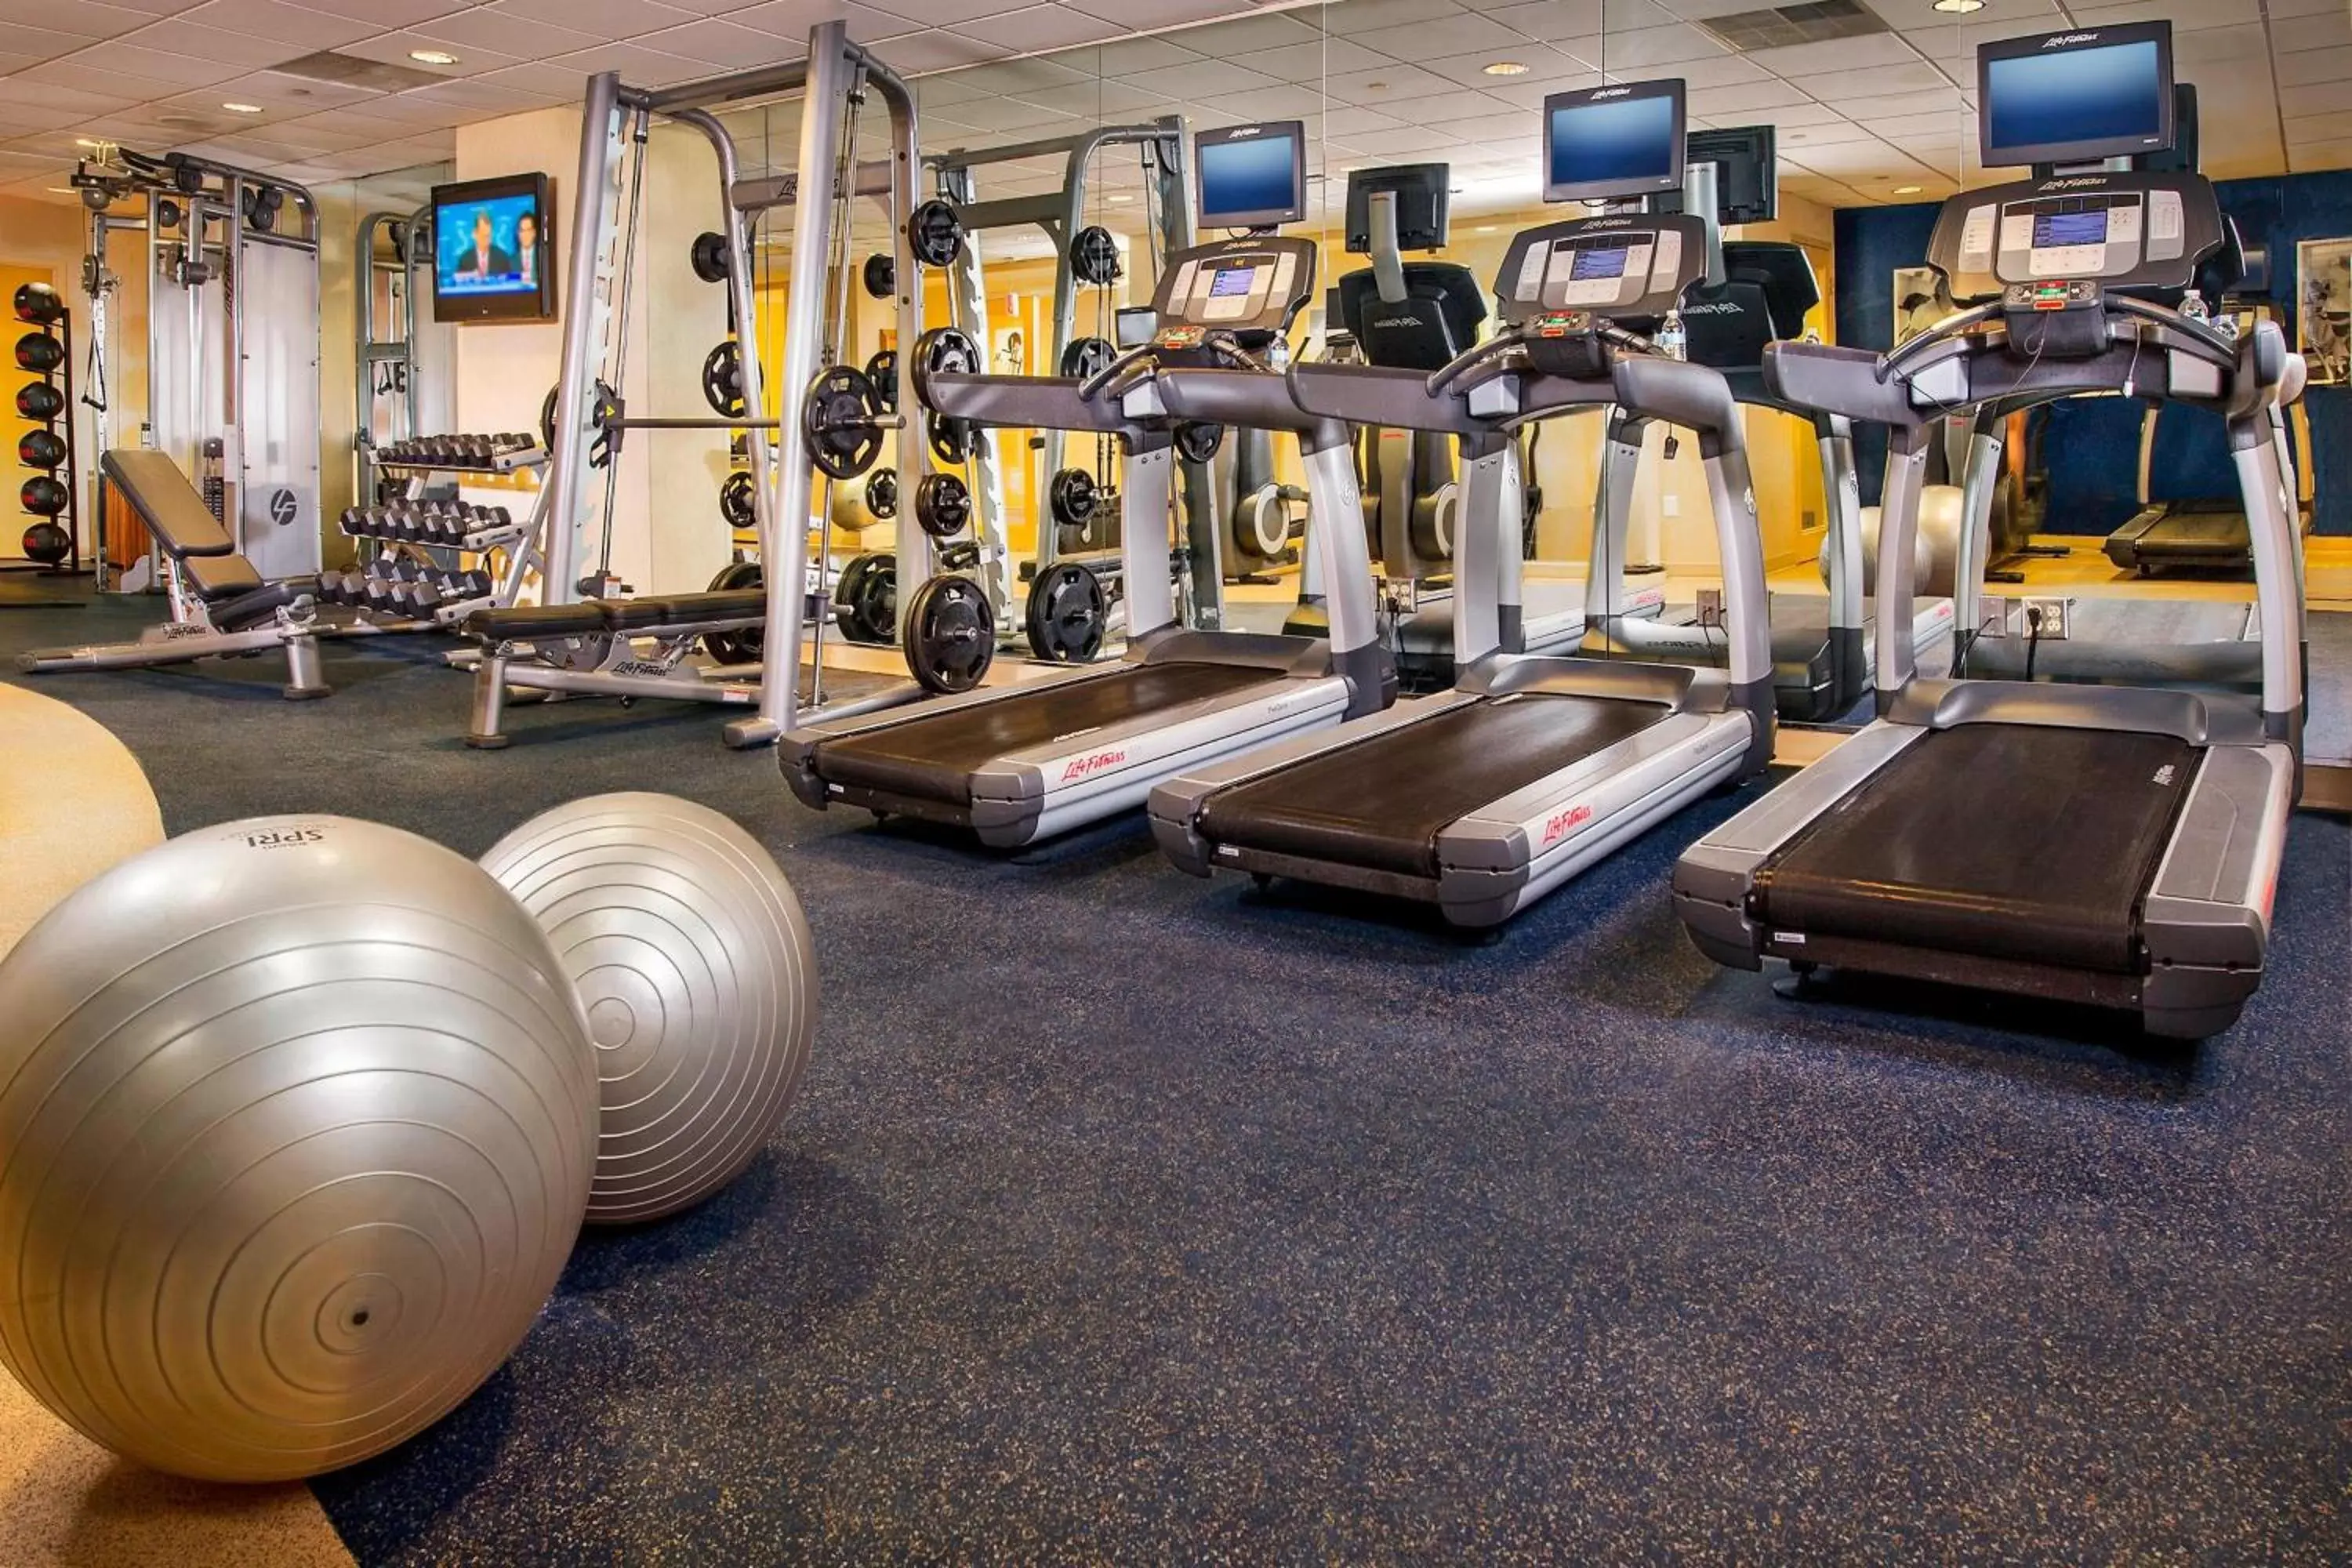 Fitness centre/facilities, Fitness Center/Facilities in BWI Airport Marriott